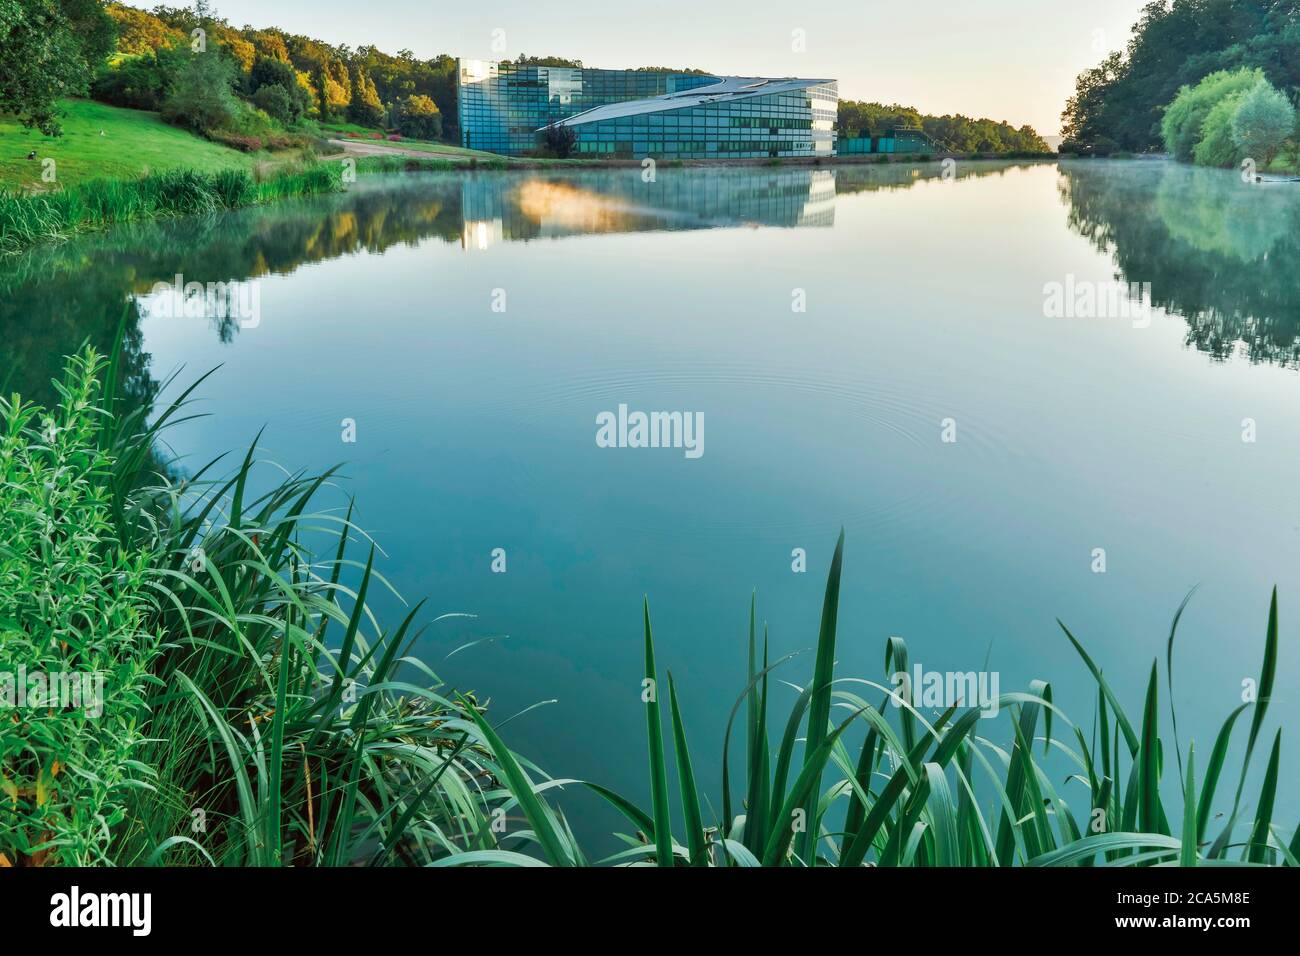 France, Tarn, Pierre Fabre laboratories, Lavaur, Les Cauquillous, exterior of a building of modern and contemporary architecture in glass at sunrise in lush greenery Stock Photo